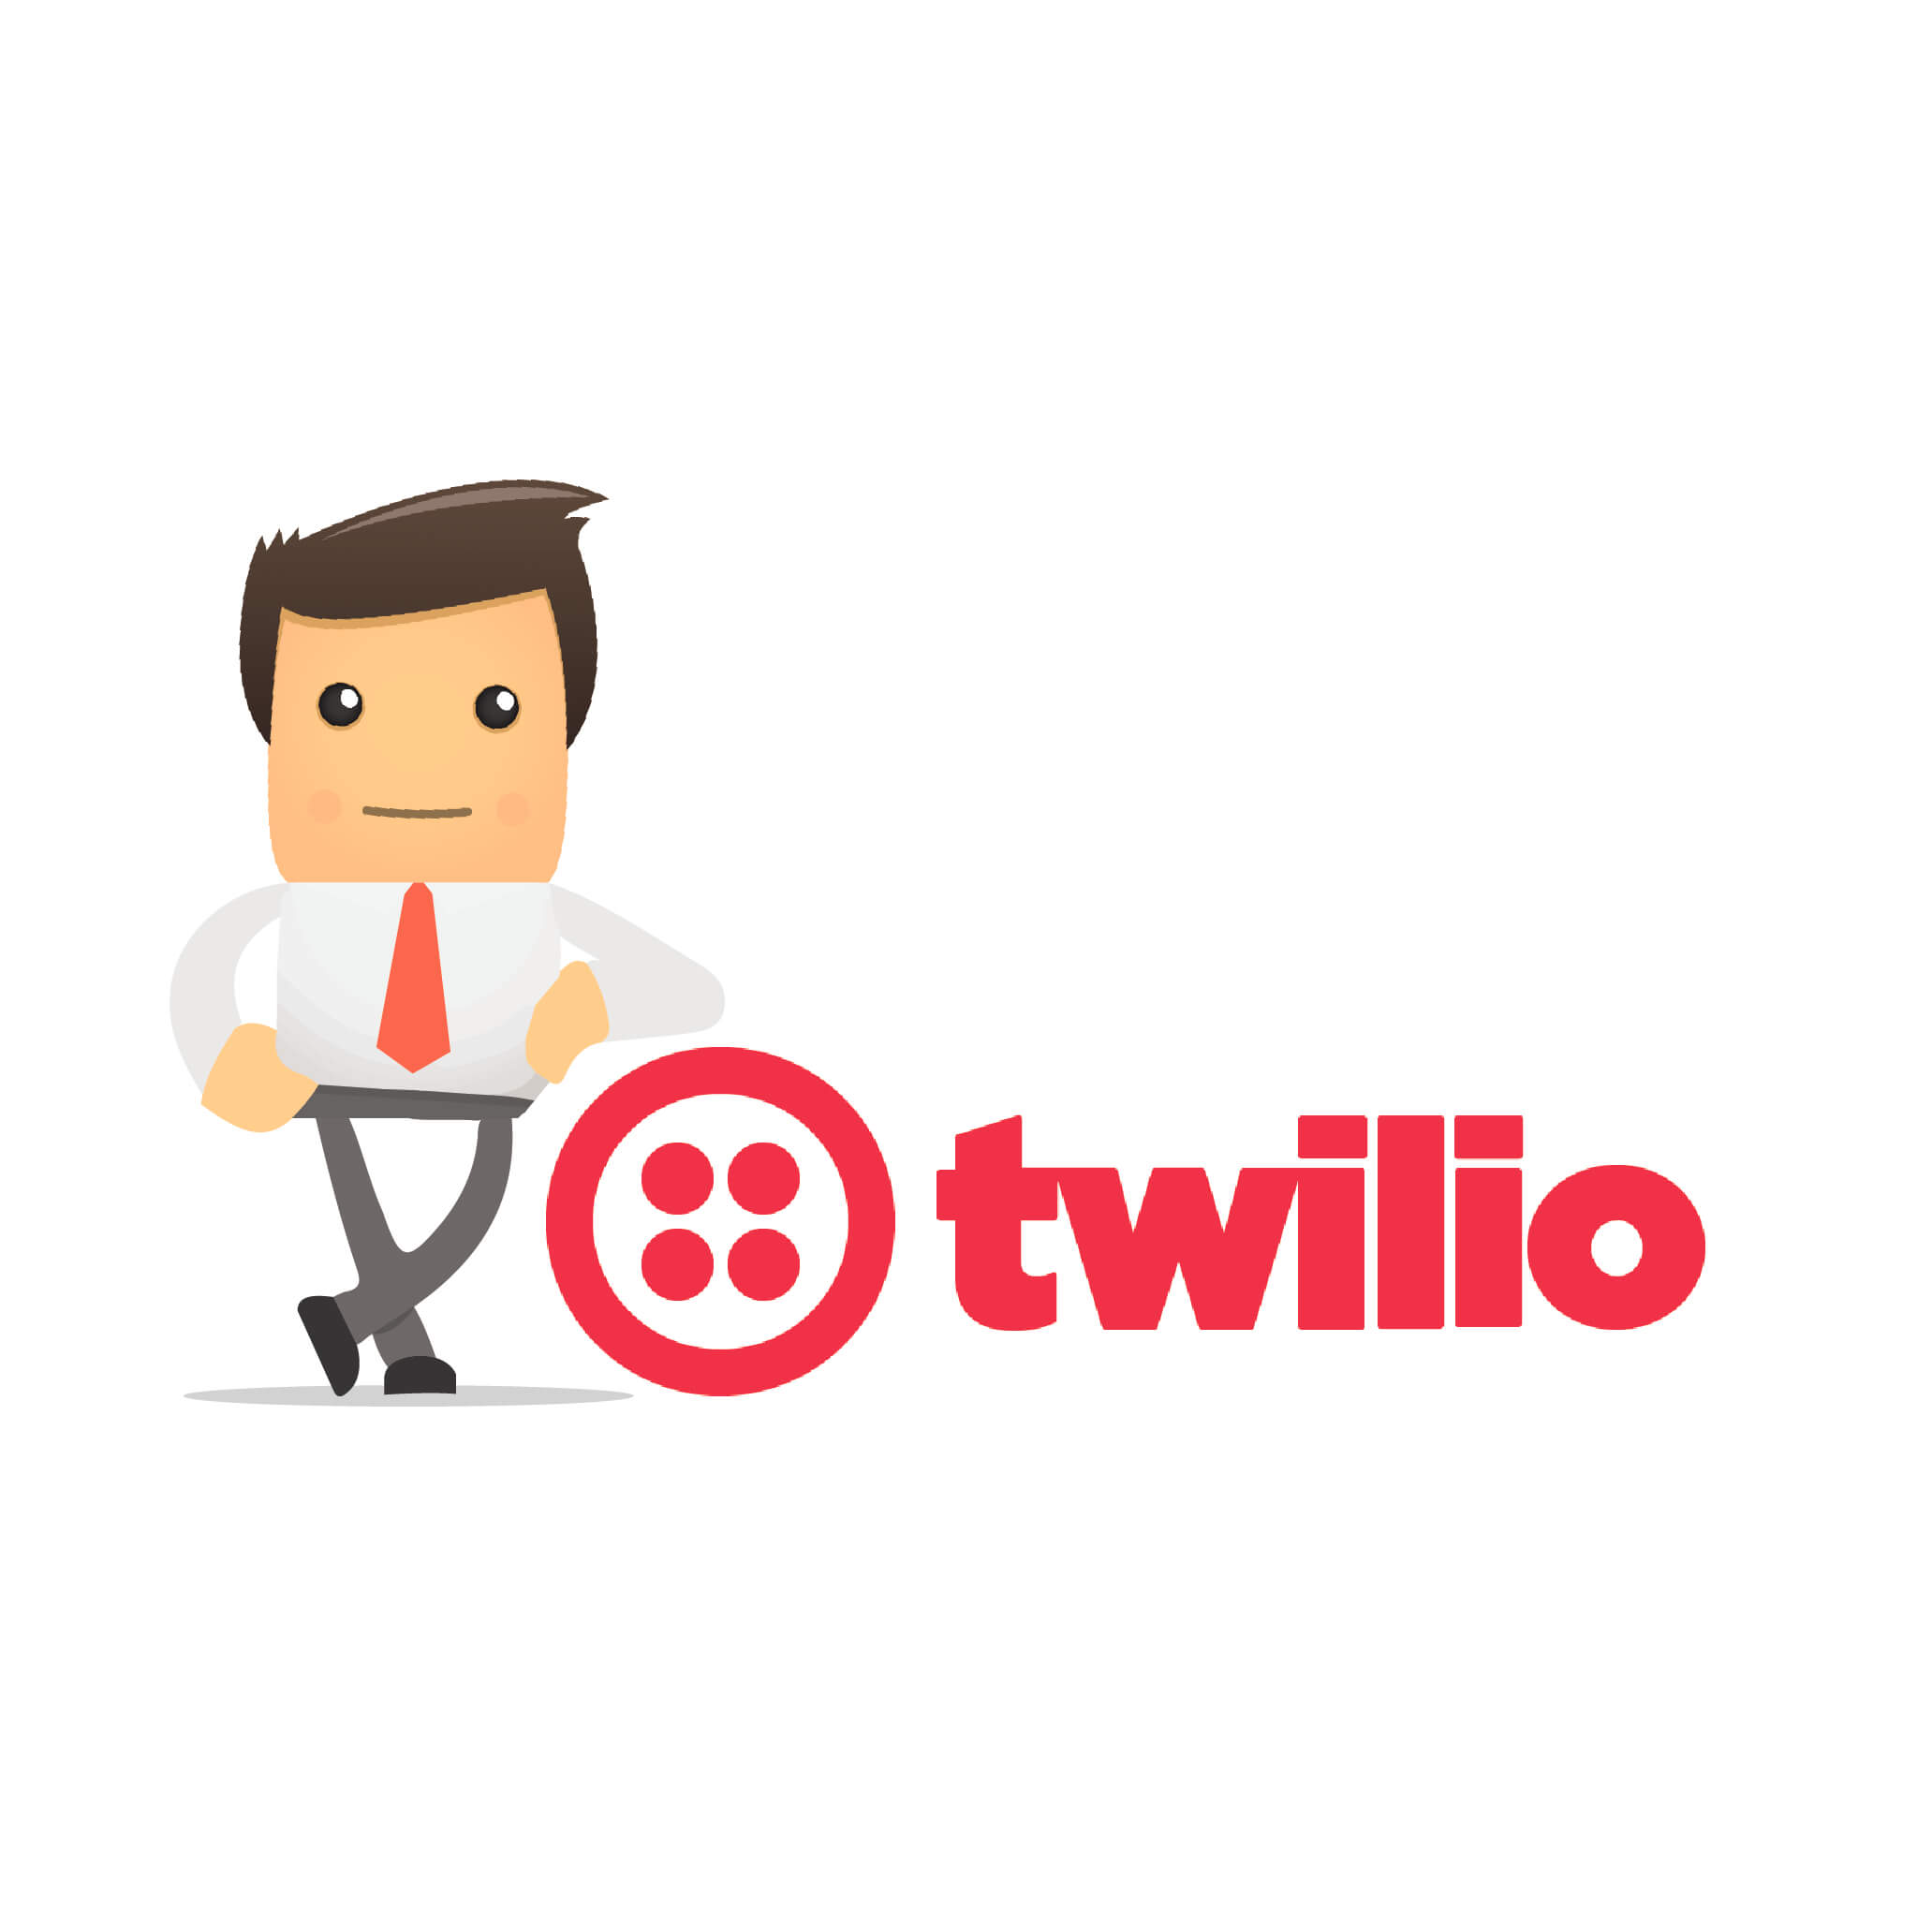 Top 3 Tech Shares That Can Make You Rich in March and After - Twilio